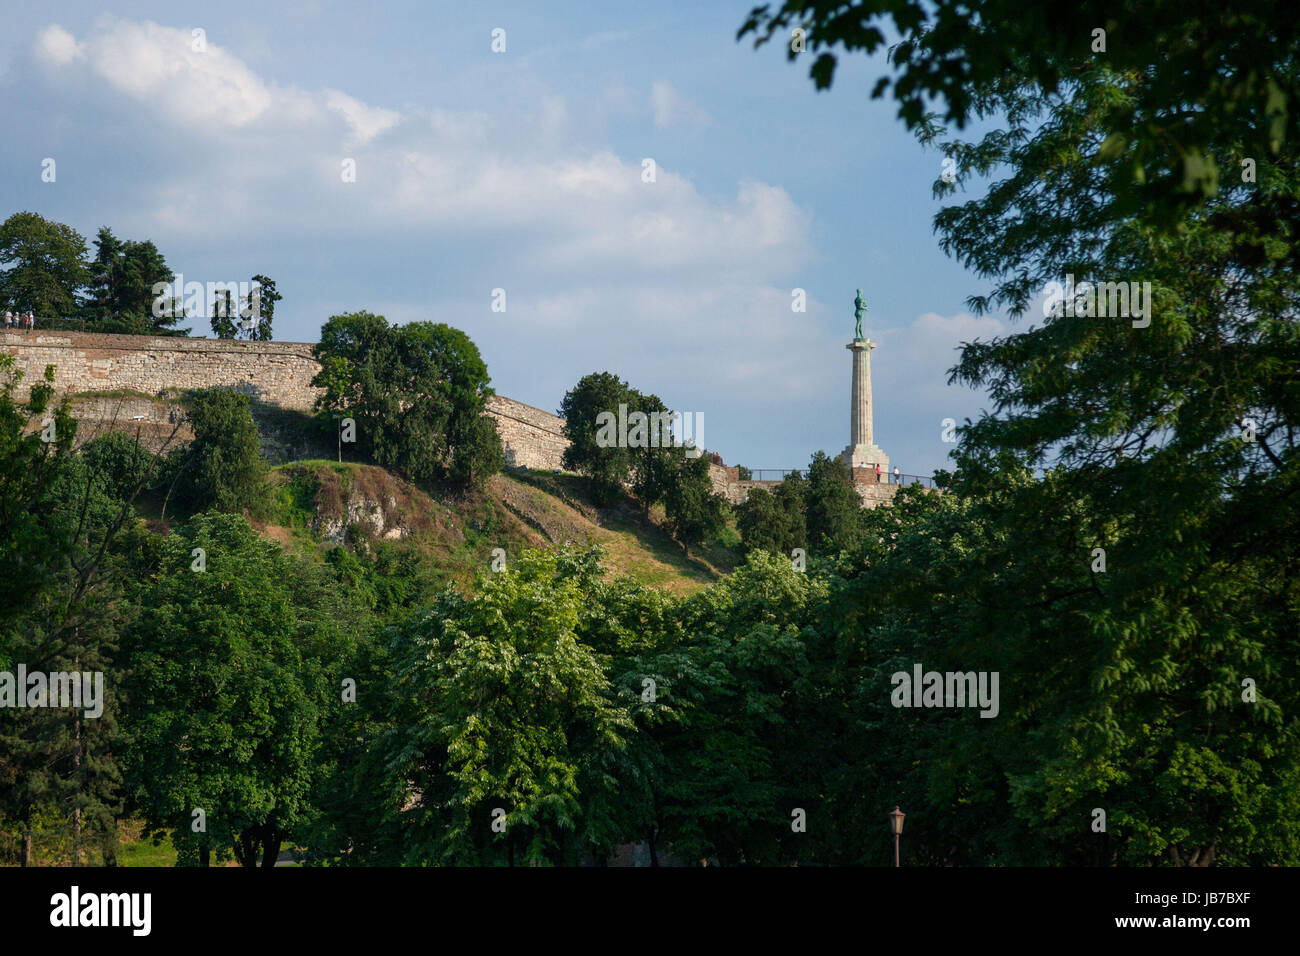 Victor statue on Kalemegdan fortress seen from the bottom in Belgrade, Serbia   Picture of the iconic victory statue seen on Belgrade's fortress, Kale Stock Photo